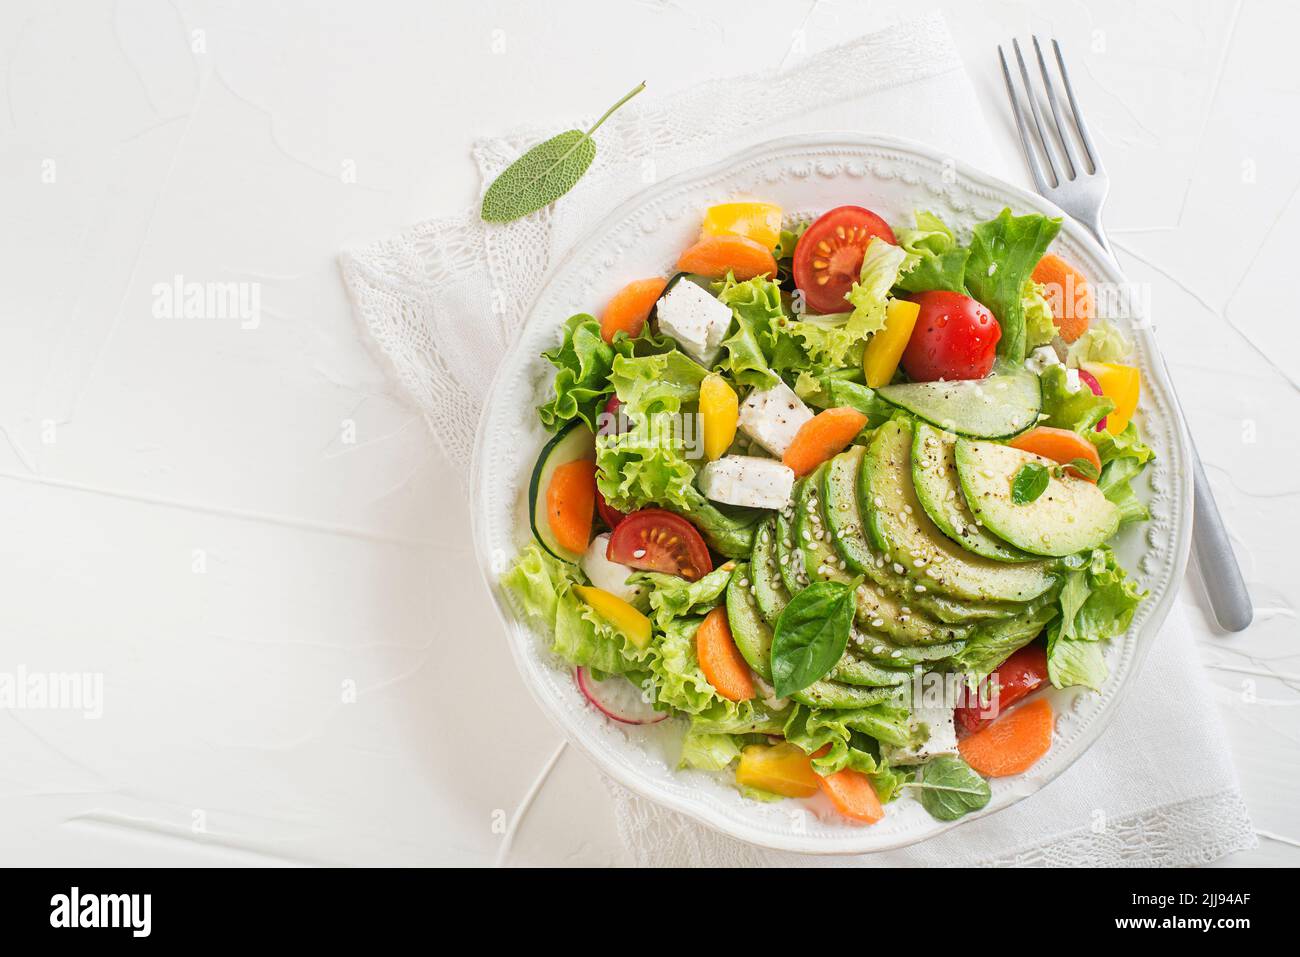 Healthy green salad with avocado, feta cheese and fresh vegetables on white background close up Stock Photo